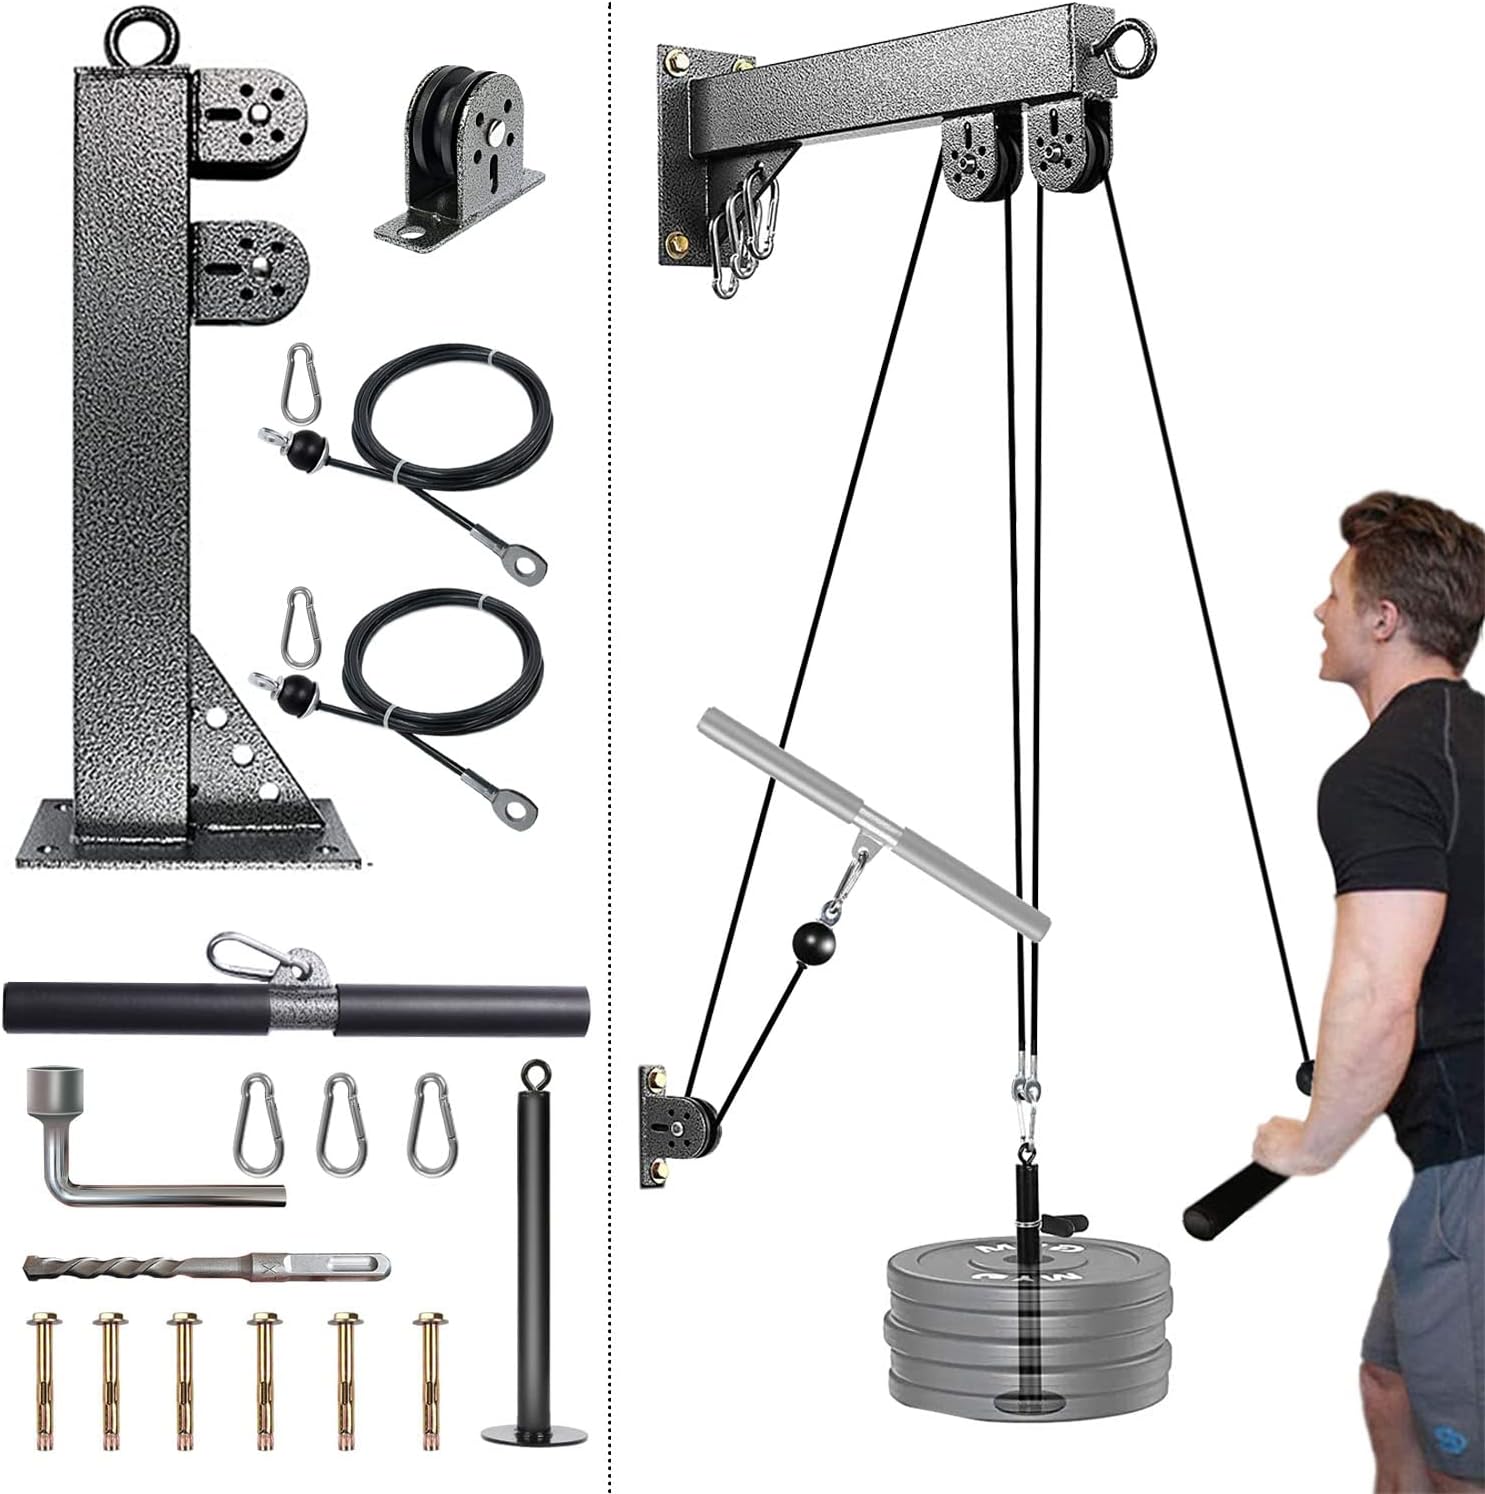 MARSAFIT Fitness Wall Mount Pulley System, Weight [...]